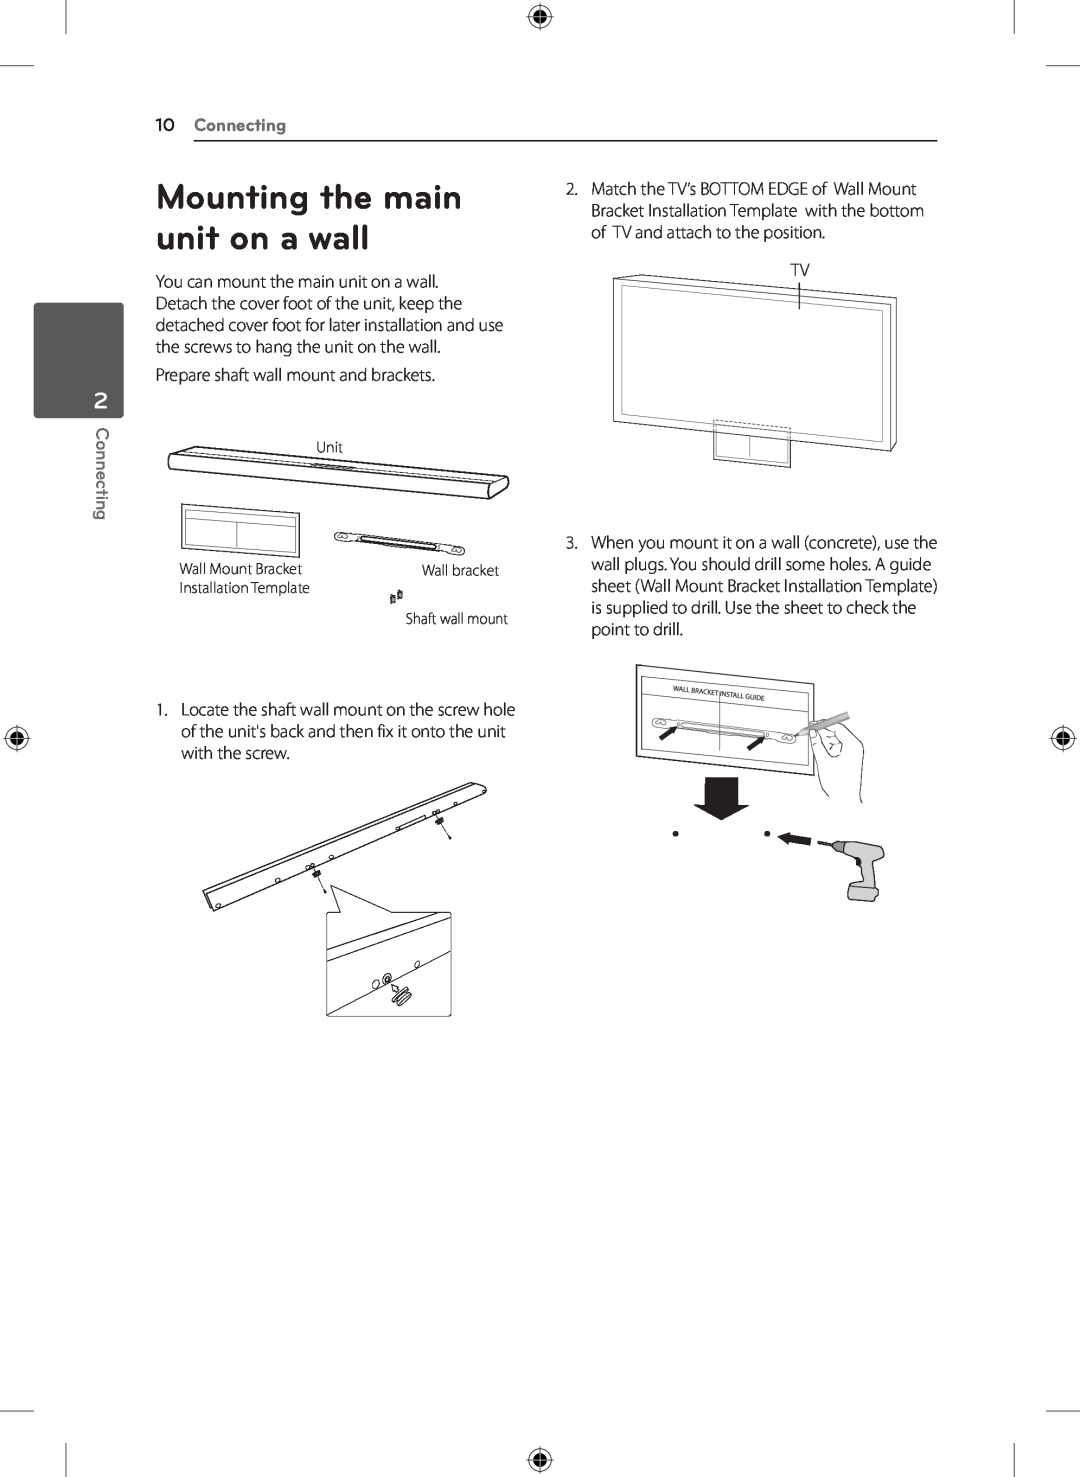 LG Electronics S43A1-D, NB4530A owner manual Mounting the main, unit on a wall, 10Connecting 